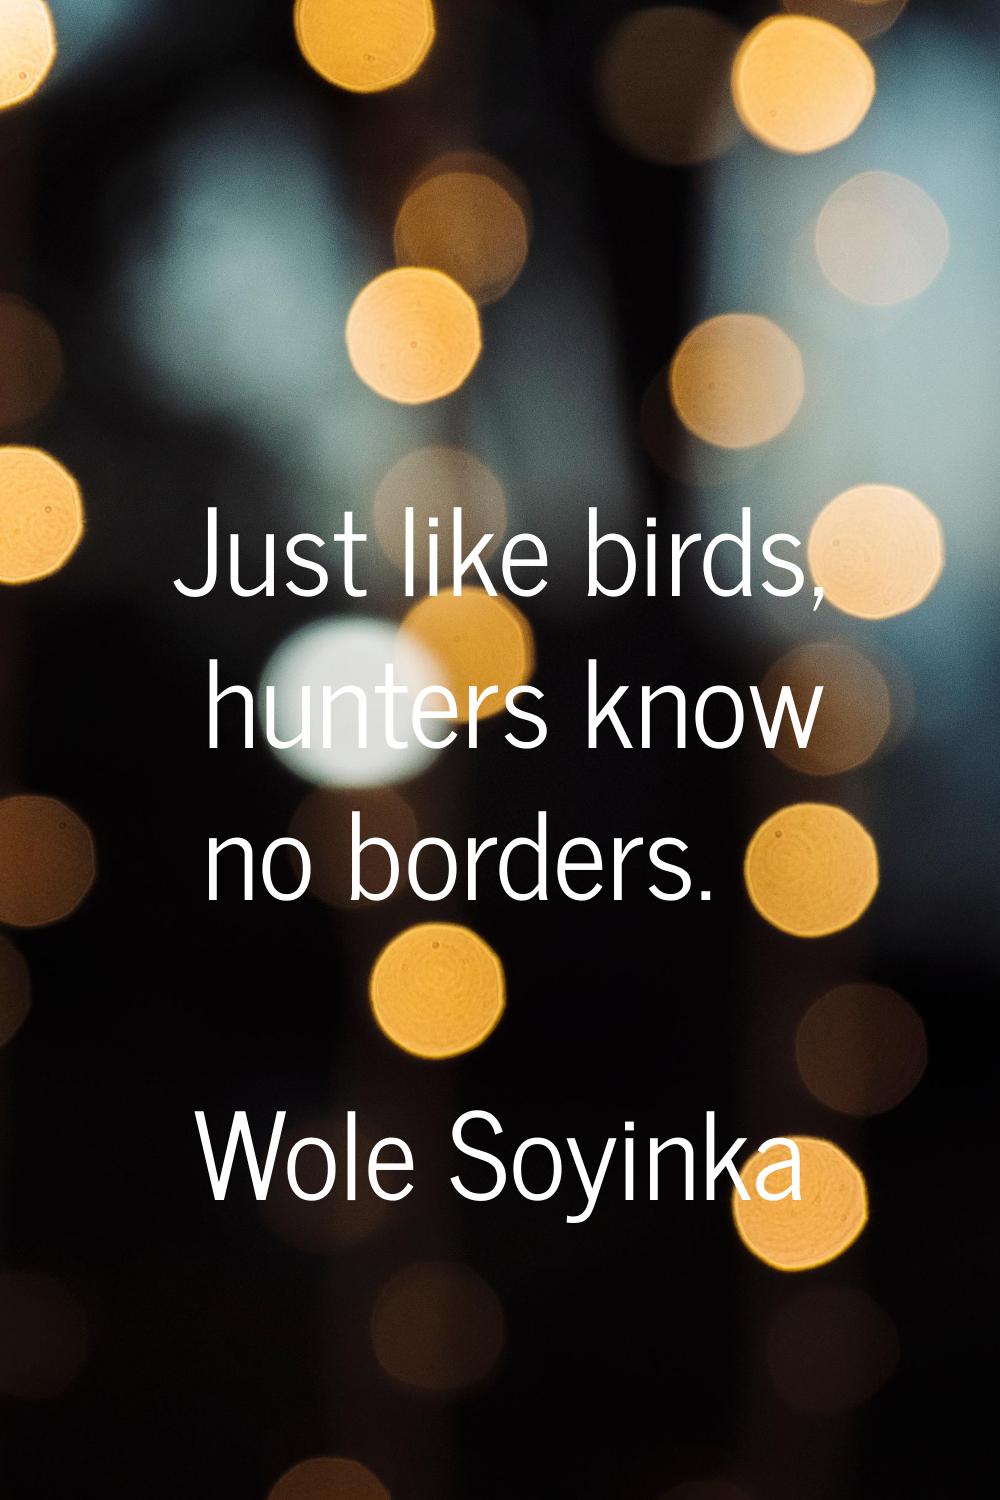 Just like birds, hunters know no borders.